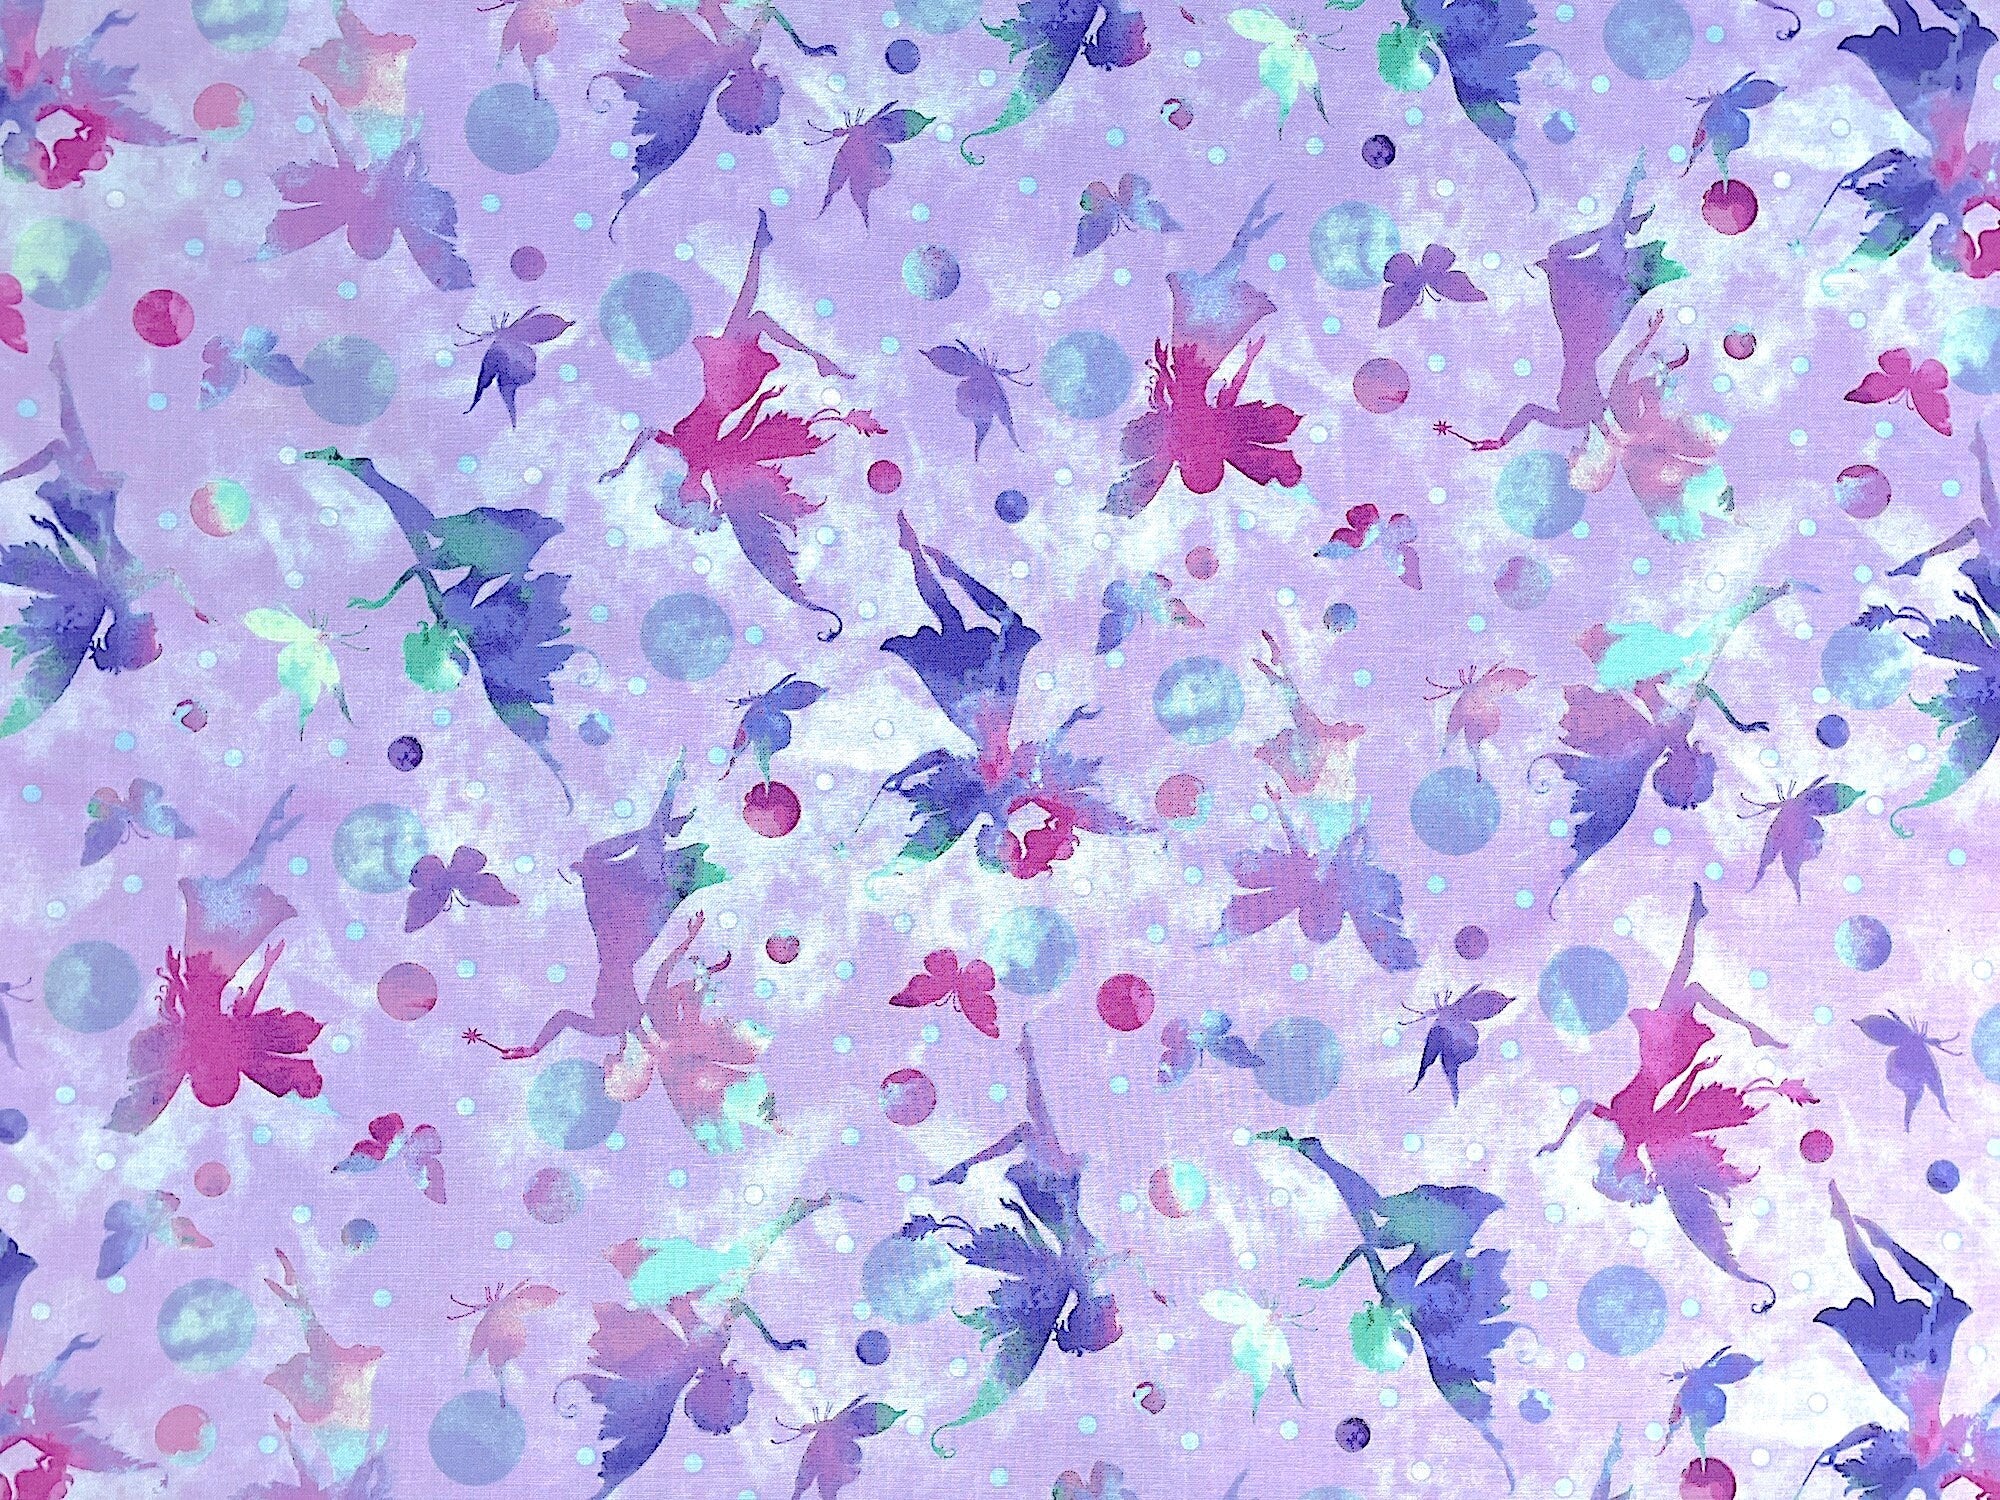 This fabric is part of the Fairytale Forest collection by Henry Glass. This lavender fabric is covered with fairy silhouettes.